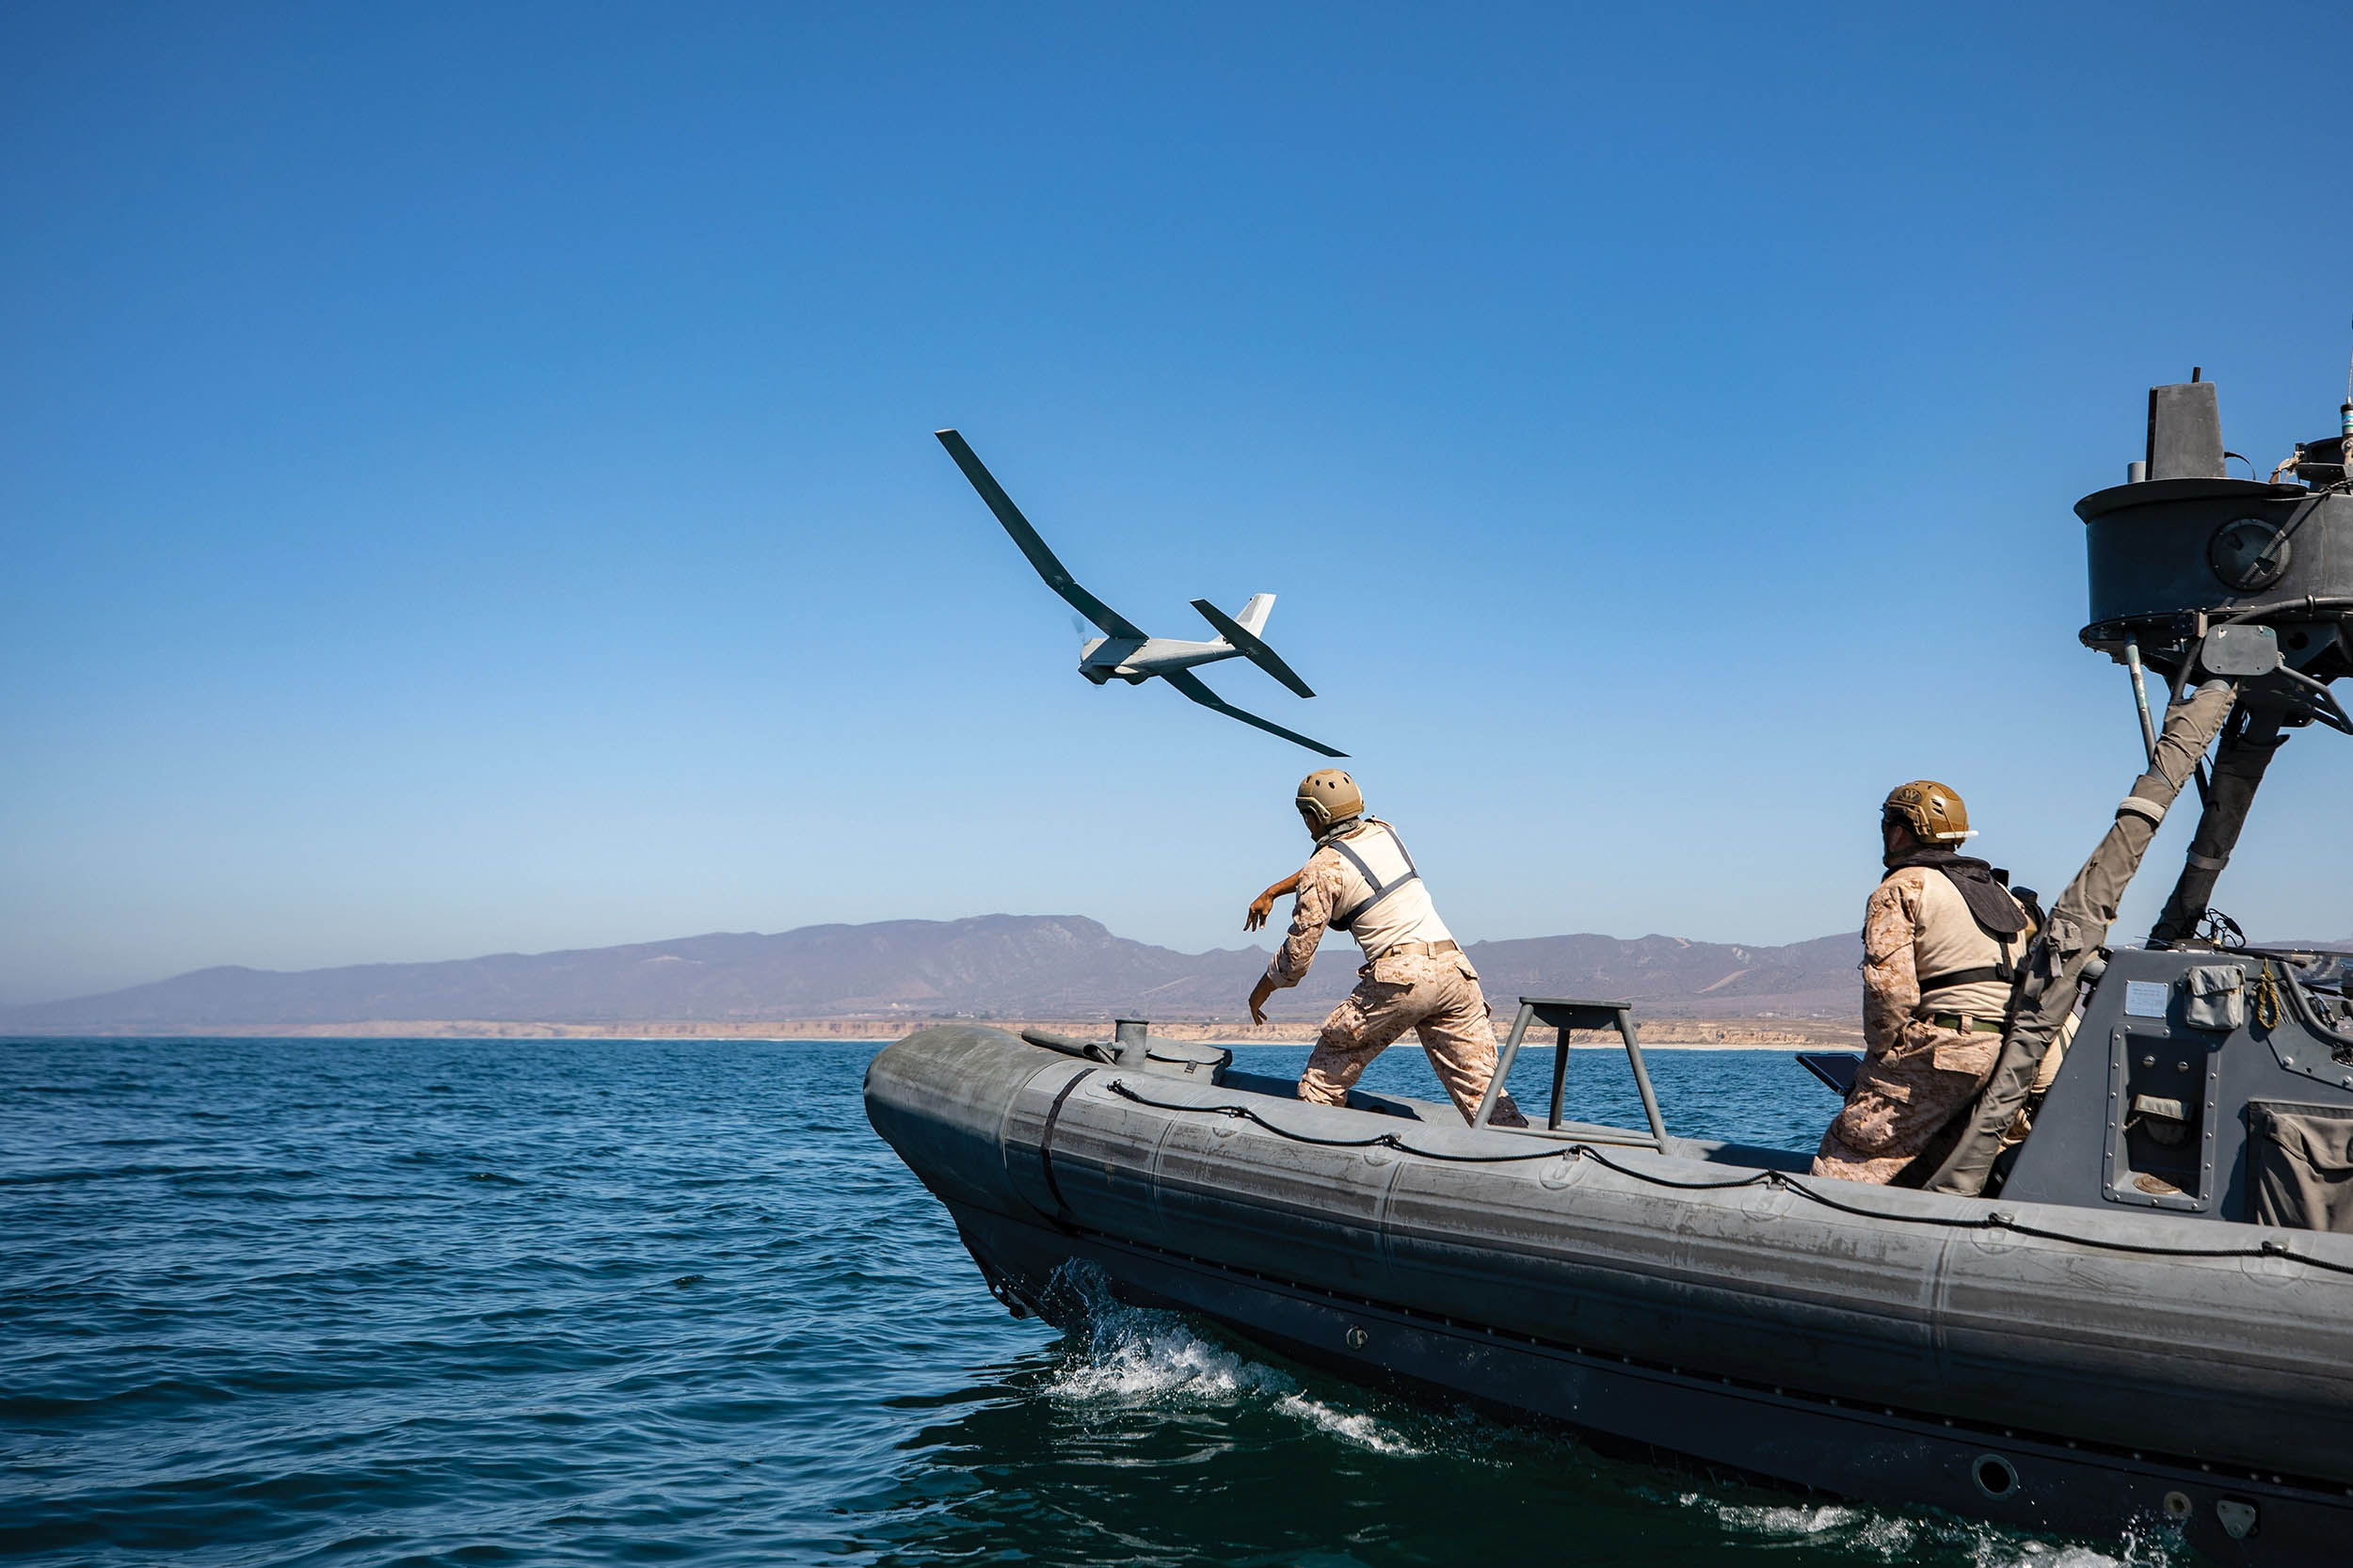 Corporal Thomas Rexrode, reconnaissance Marine with Company A, 1st Reconnaissance Battalion, 1st Marine Division, launches RQ-20B Puma small unmanned aircraft system from rigid-hull inflatable boat at Camp Pendleton, California, September 30, 2021 (U.S. Marine Corps/Connor Hancock)